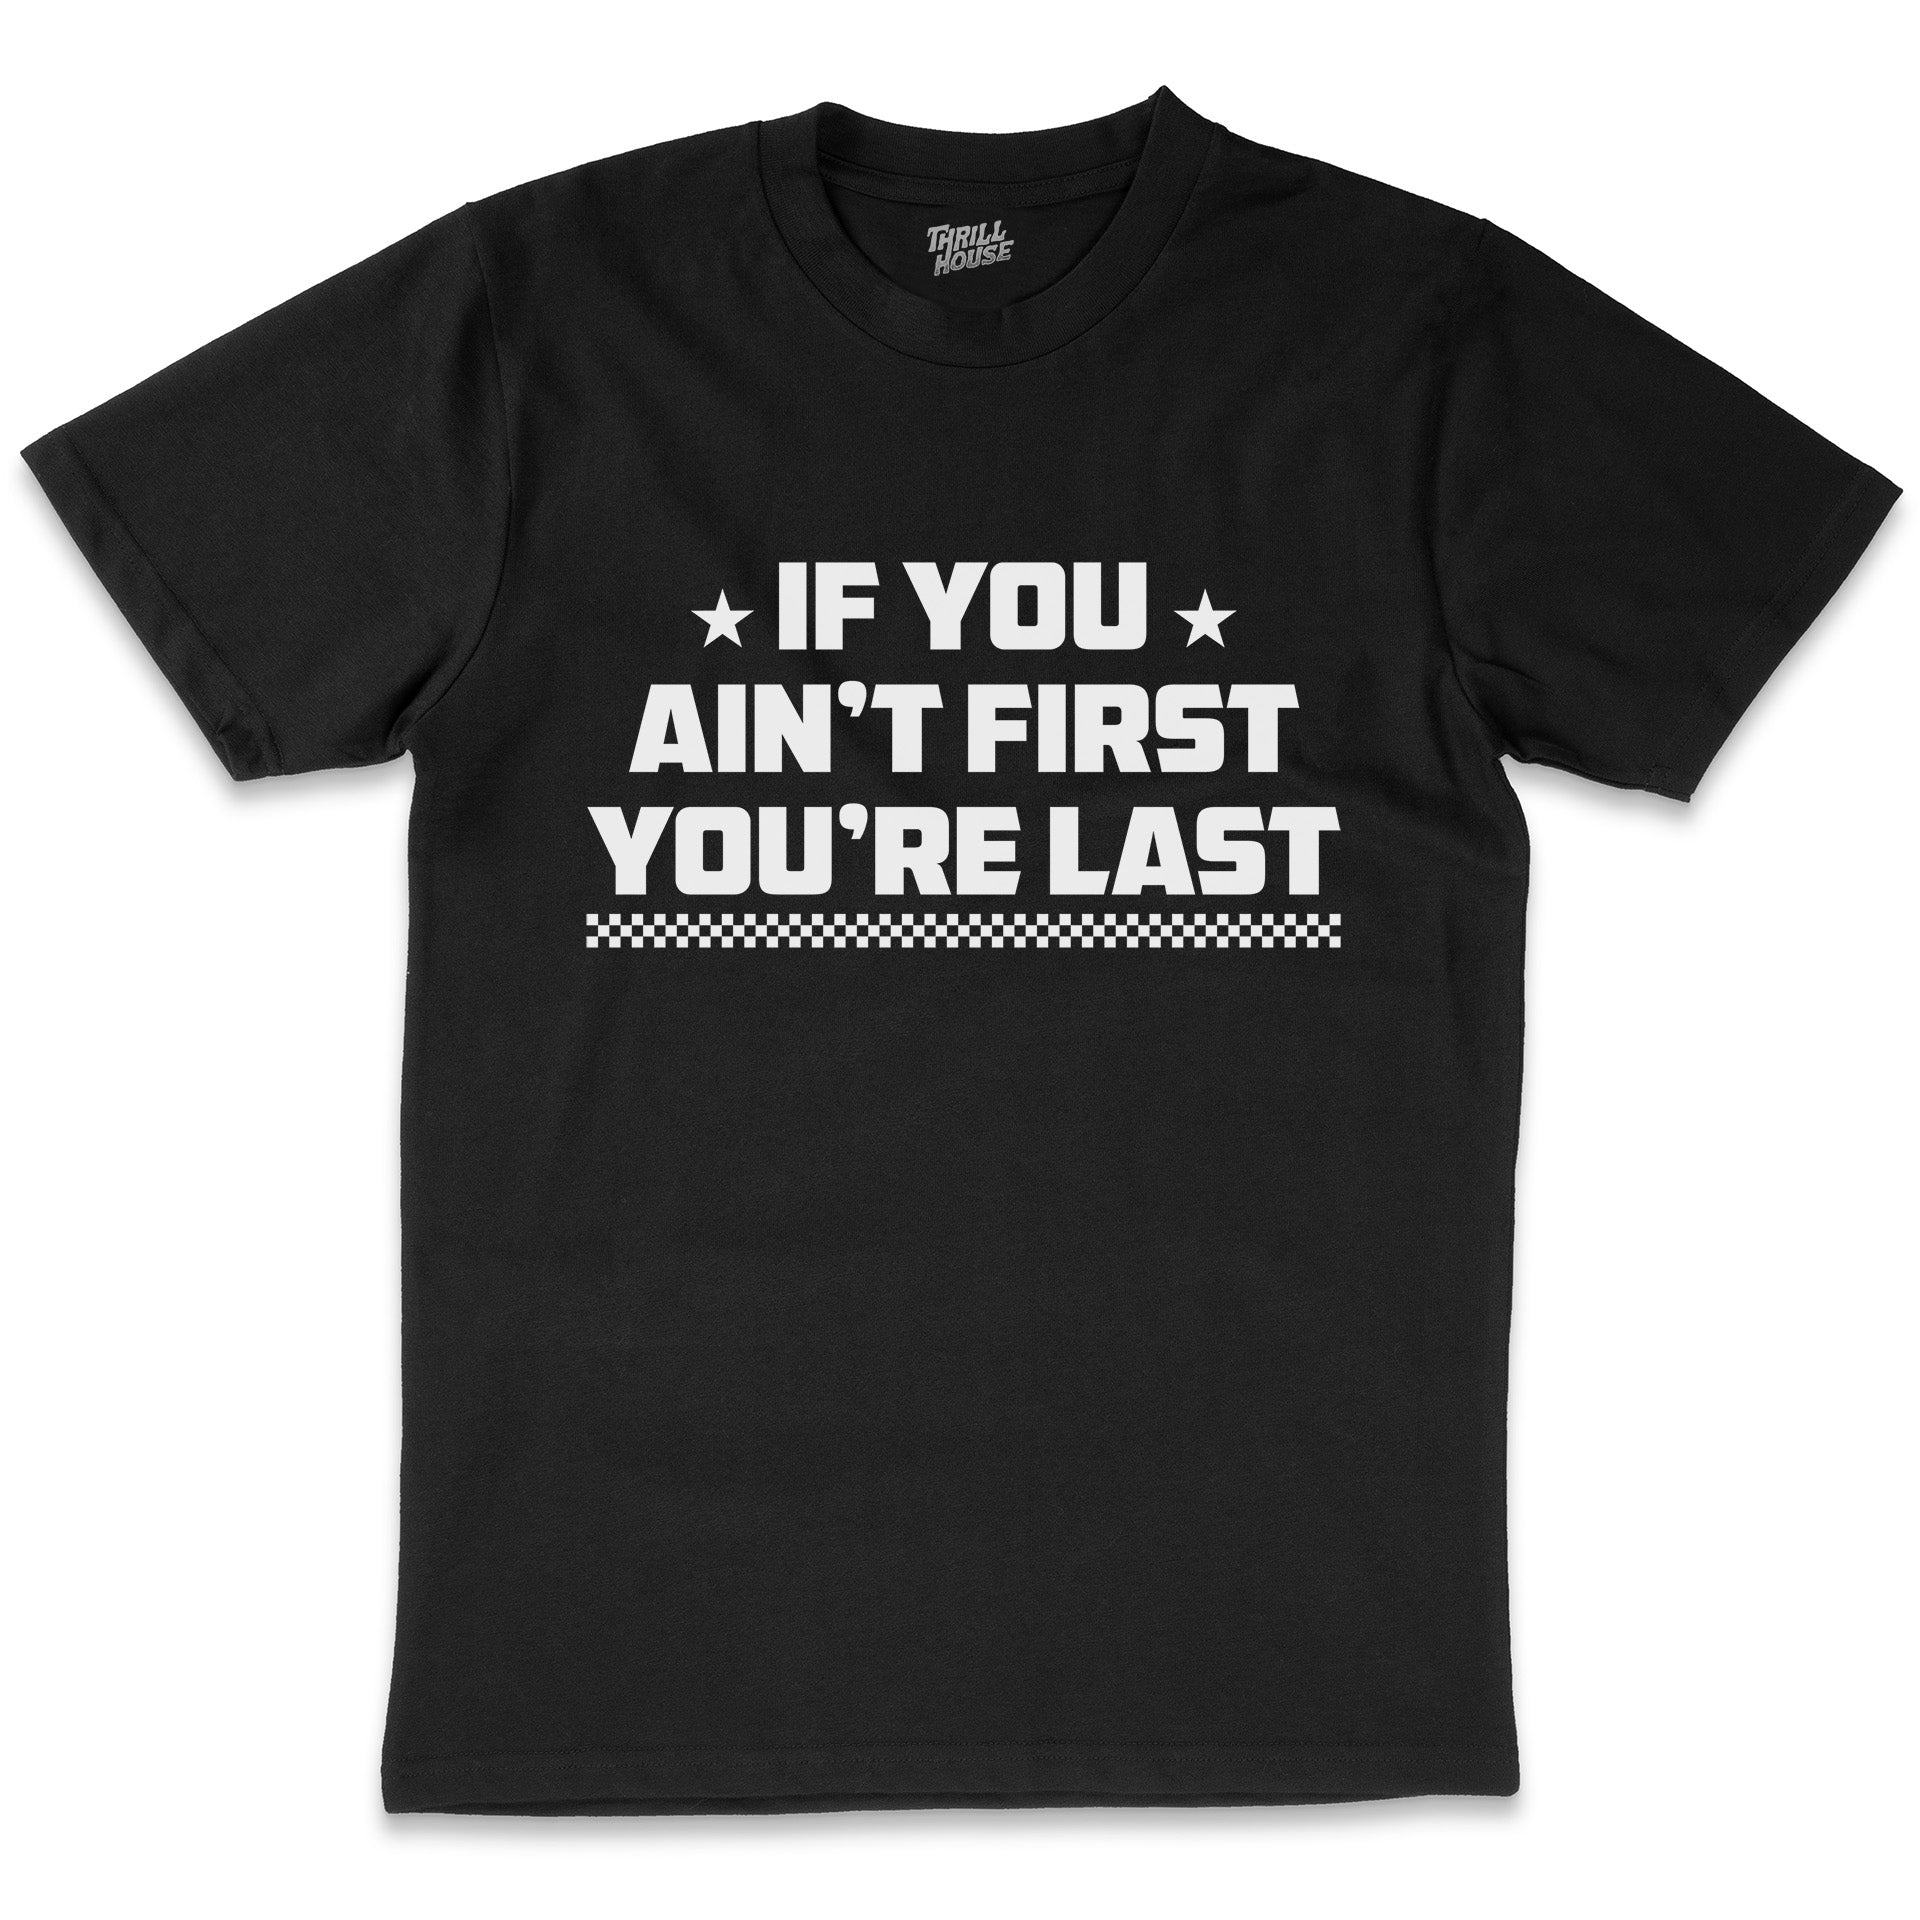 If You Ain't First You're Last Funny Sports Competitive Slogan Cotton T-Shirt